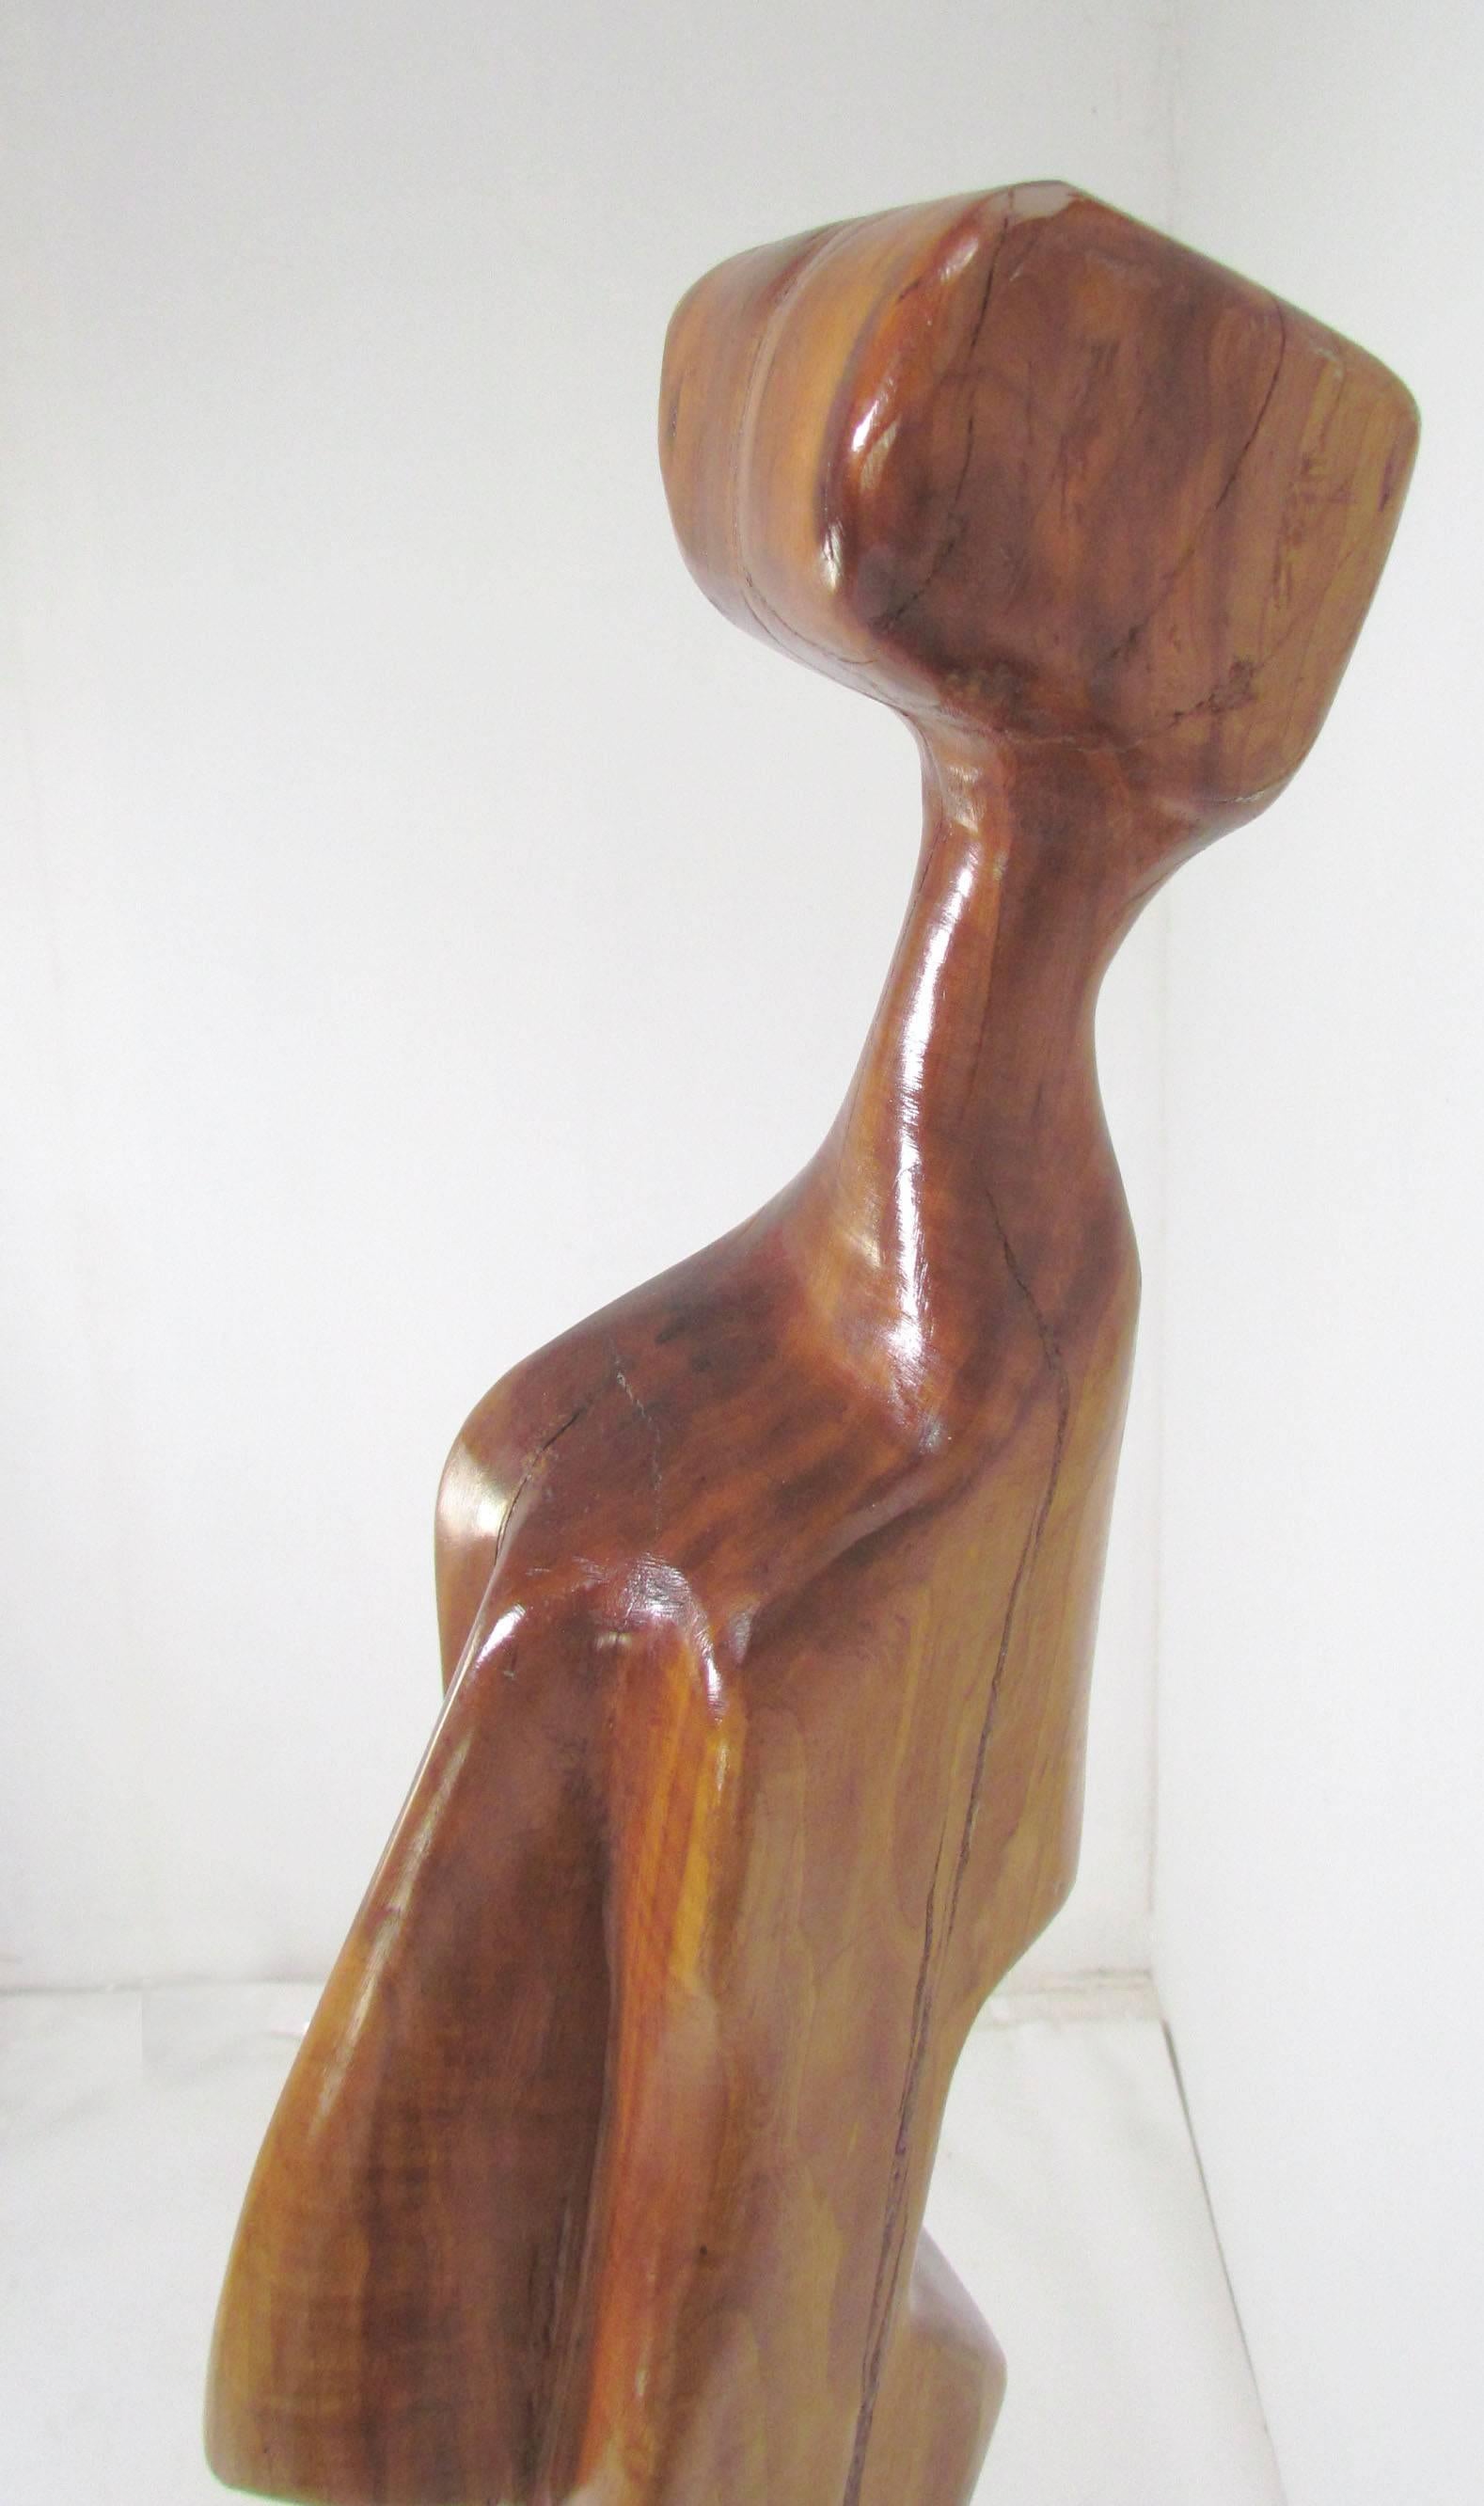 Late 20th Century Modernist Carved Wood Sculpture with Burl Pedestal Signed A. Janes, D. 1974